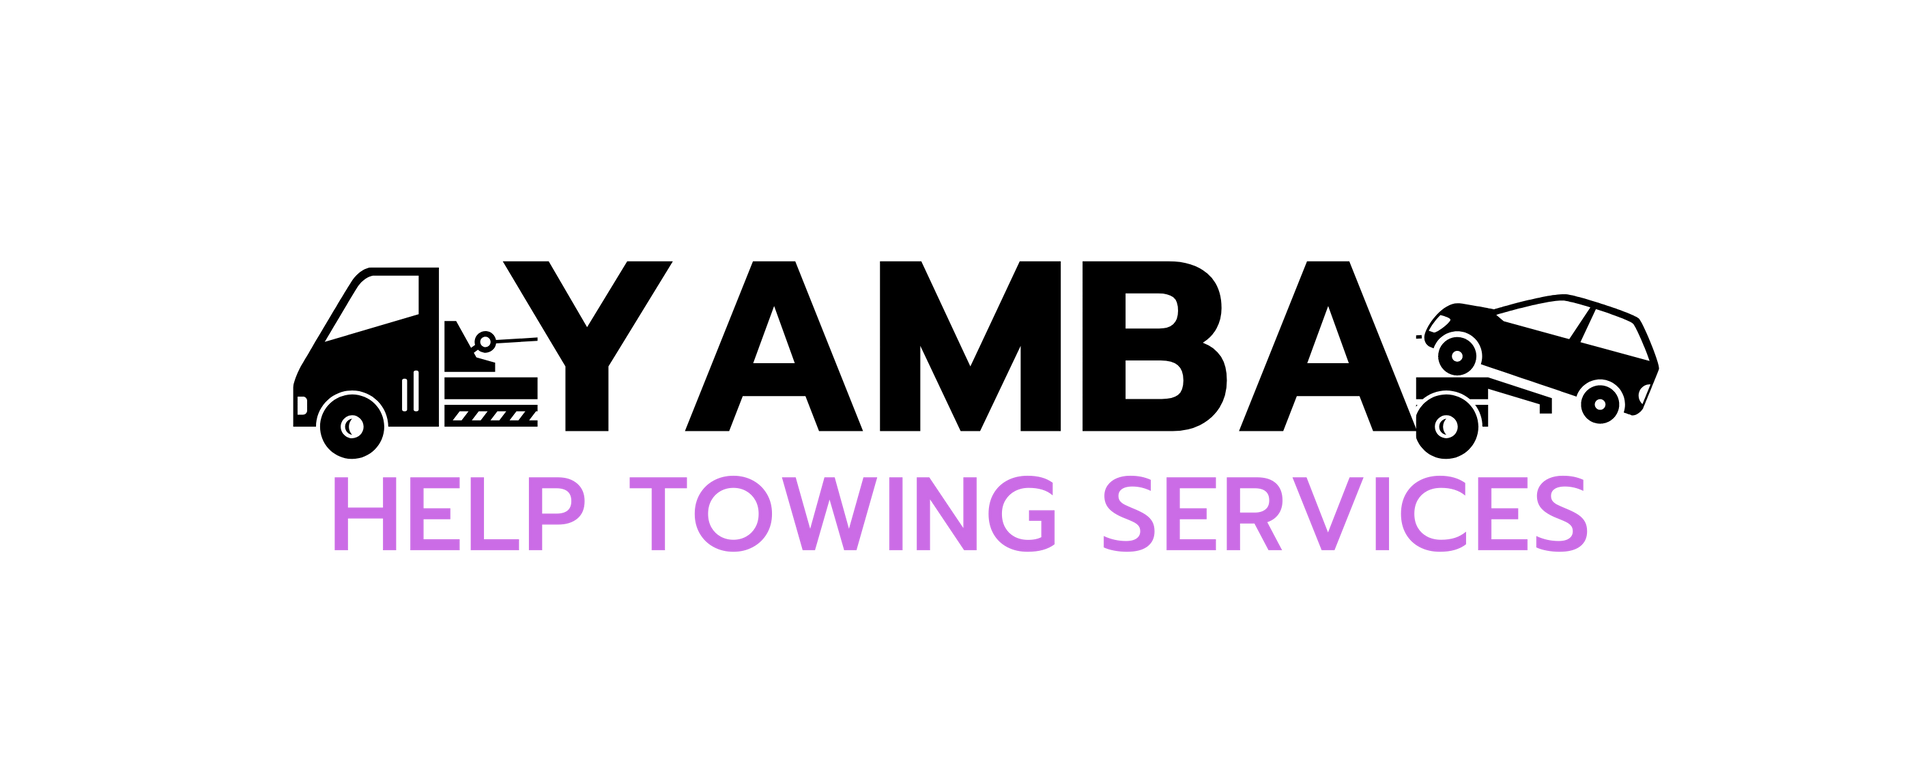 Yamba Help Towing Services